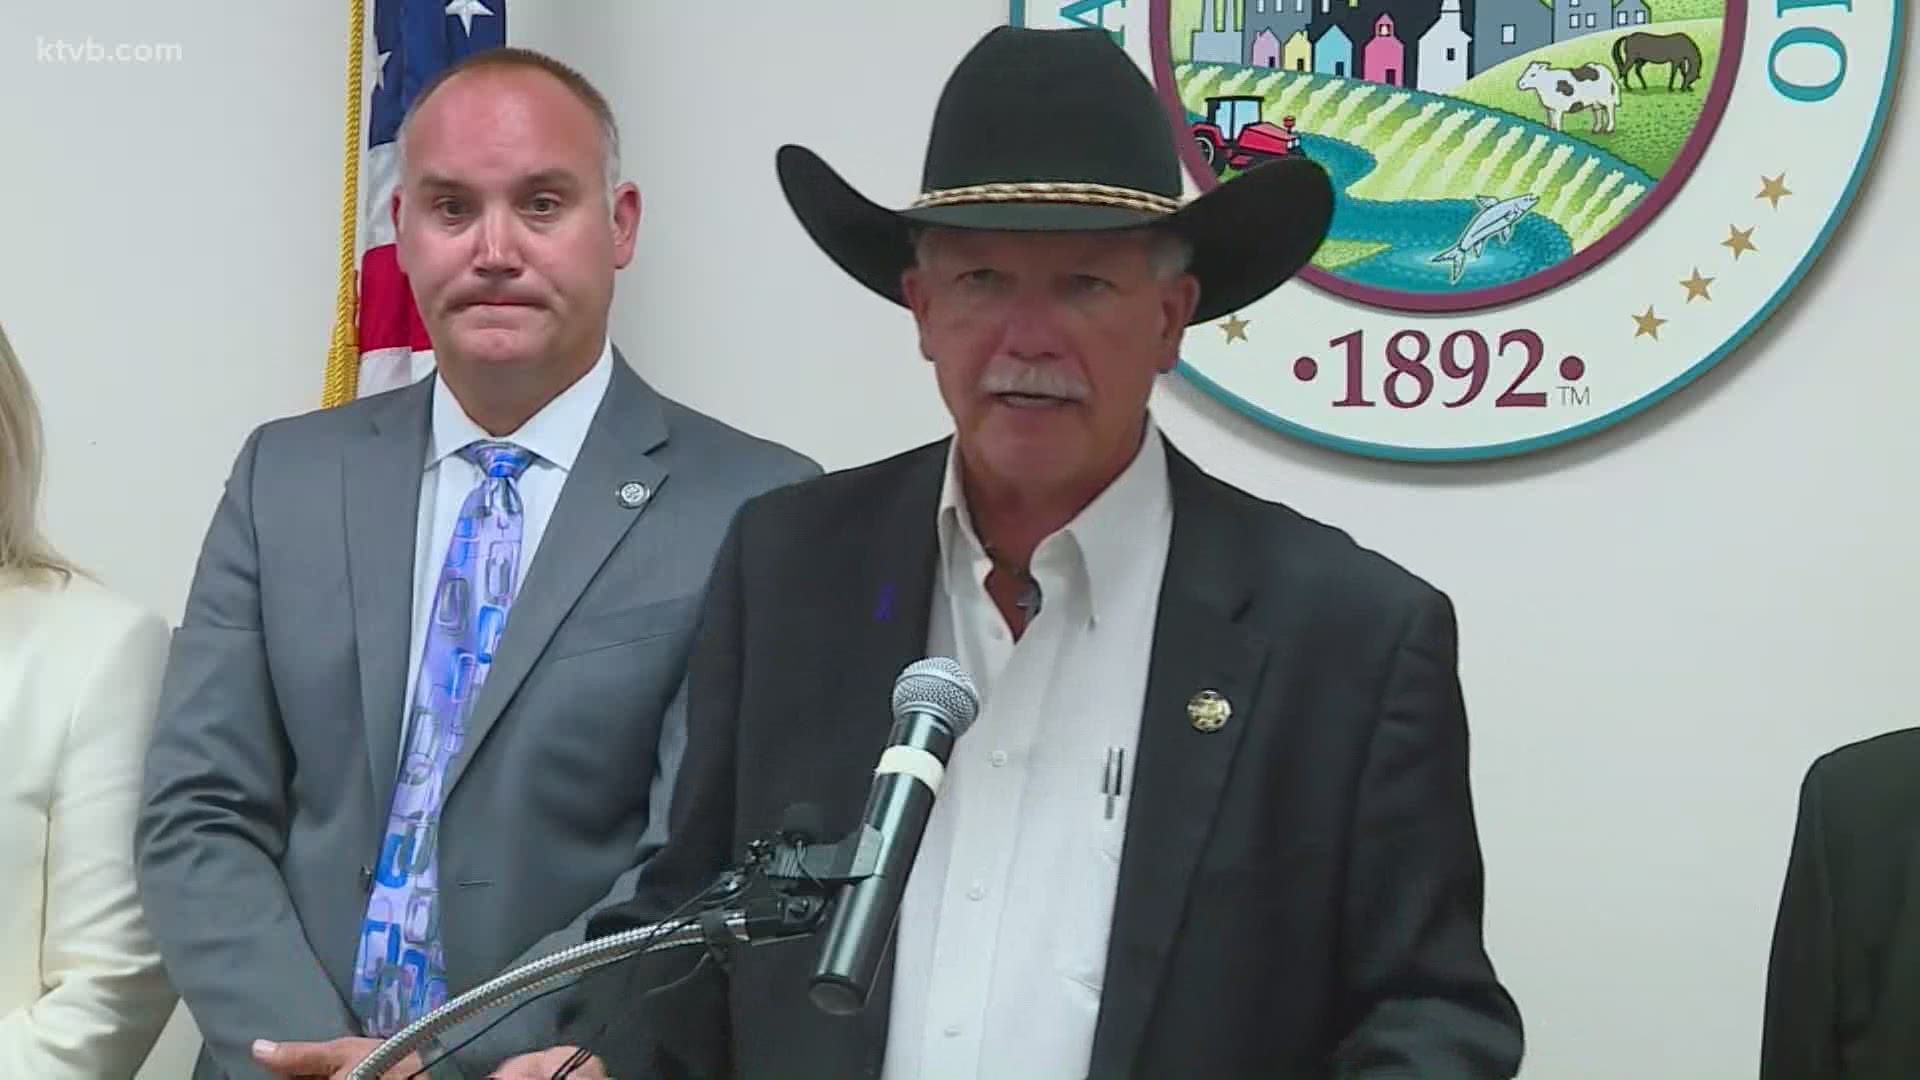 Canyon County Sheriff Kieran Donahue and the county prosecutor held a press conference at 2:30 p.m. to discuss the arrest of Erasmo Diaz.